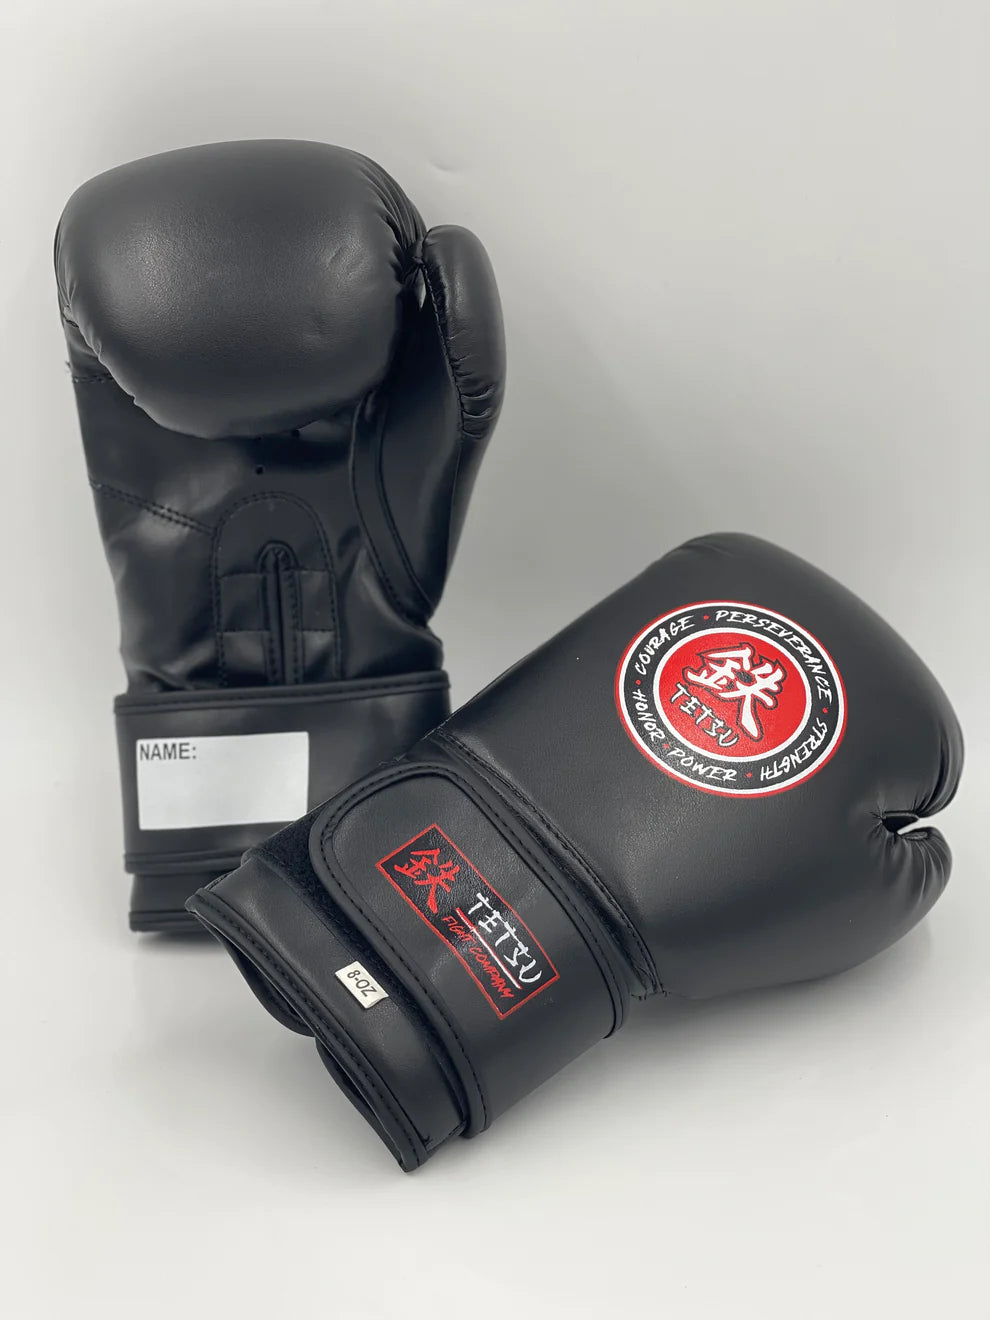 (Pre-Order Only) TETSU Boxing Gloves